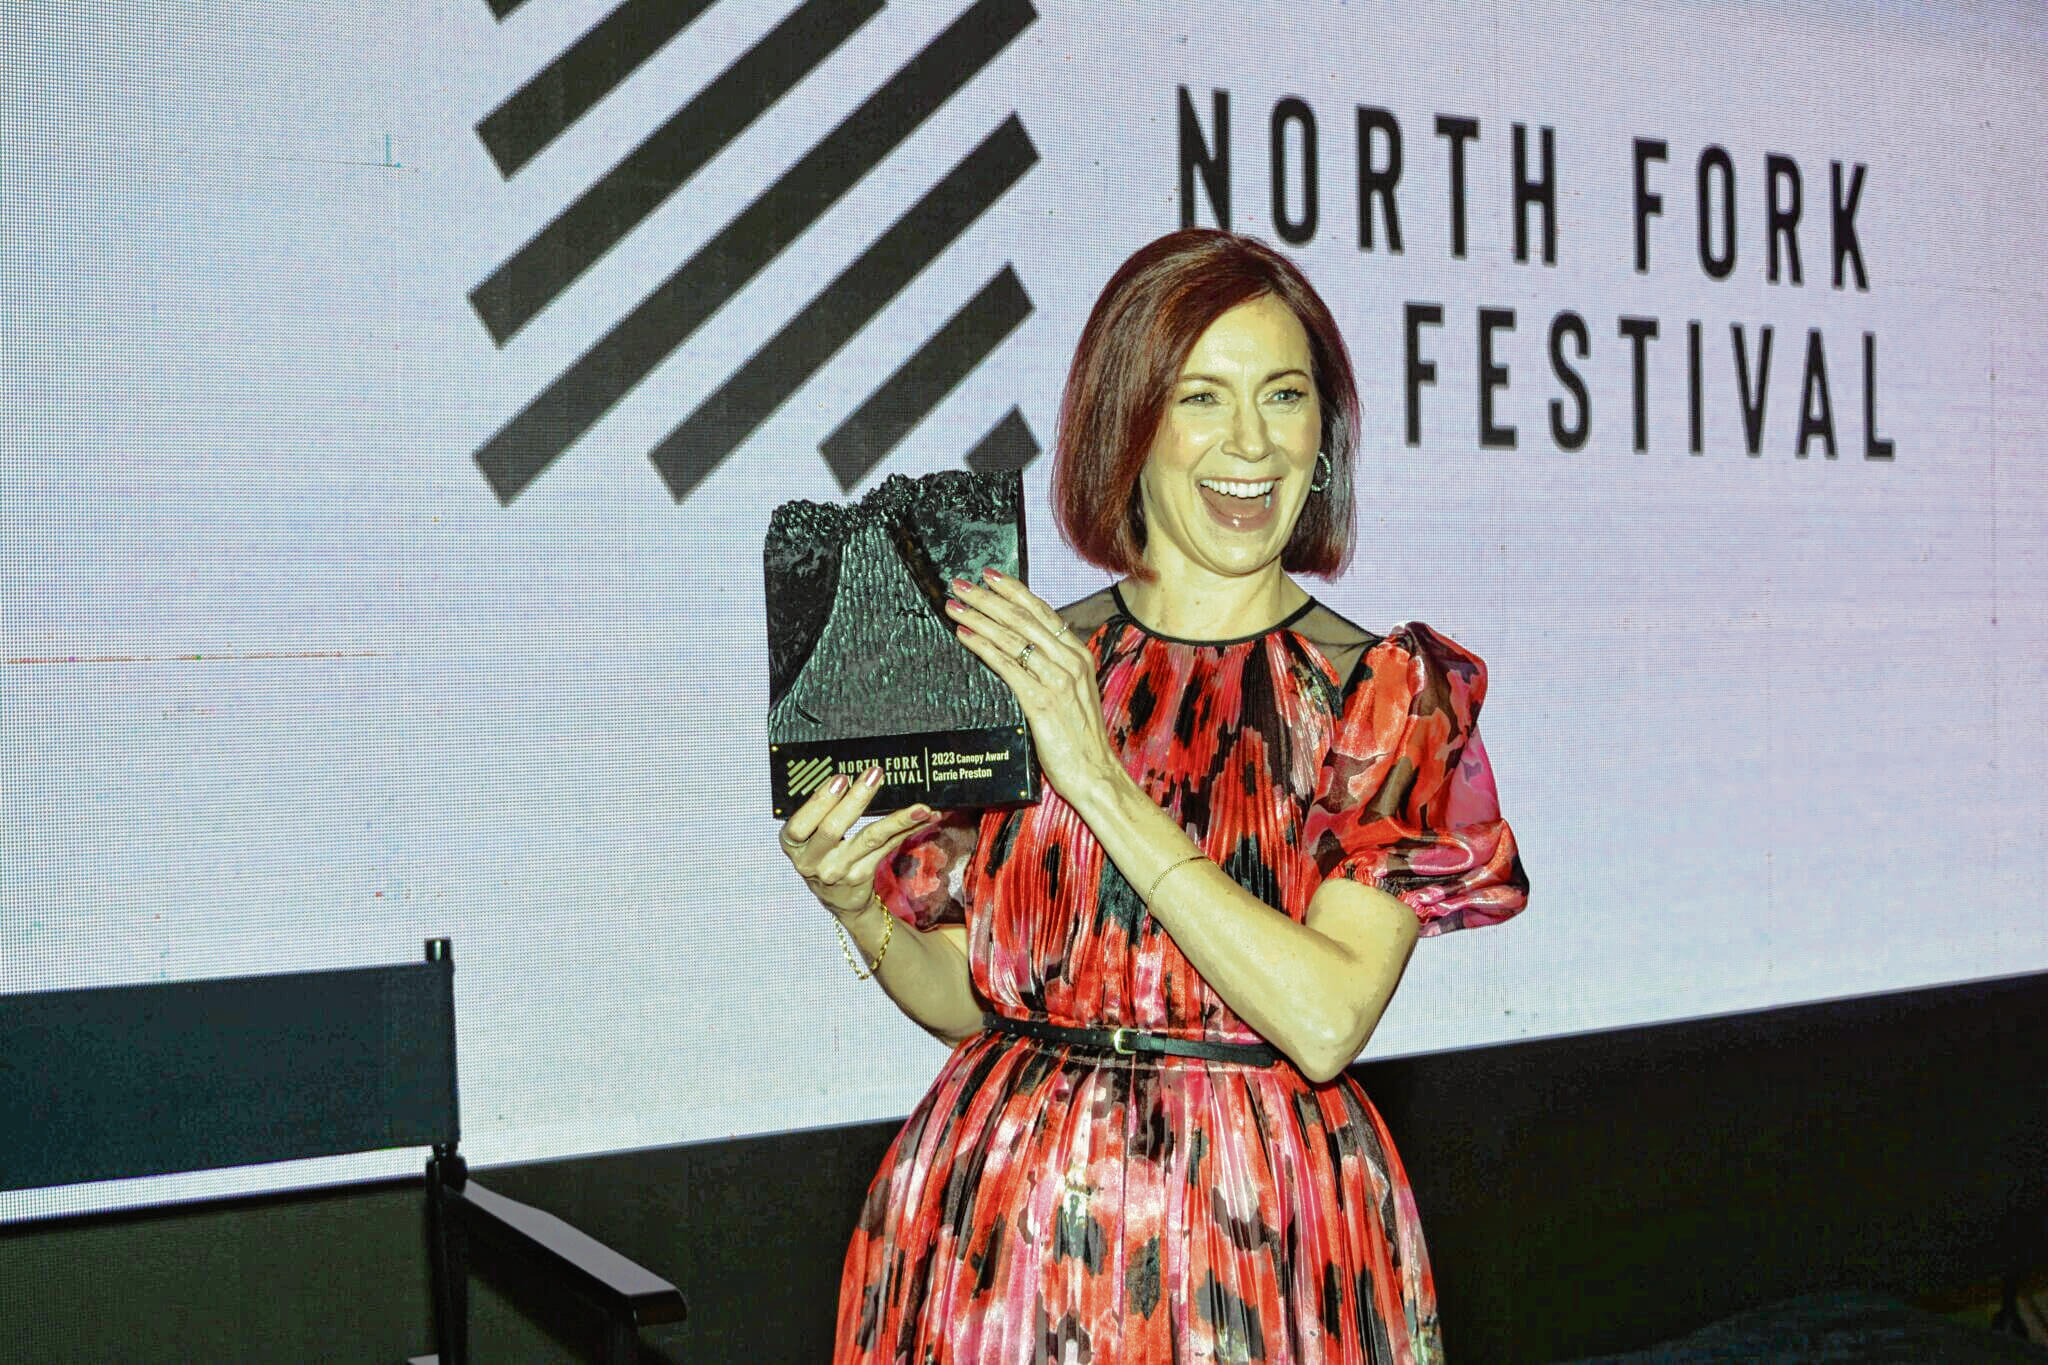 Emmy Award-winning actress Carrie Preston was presented with the 2023 Canopy Award at the North Fork TV Festival